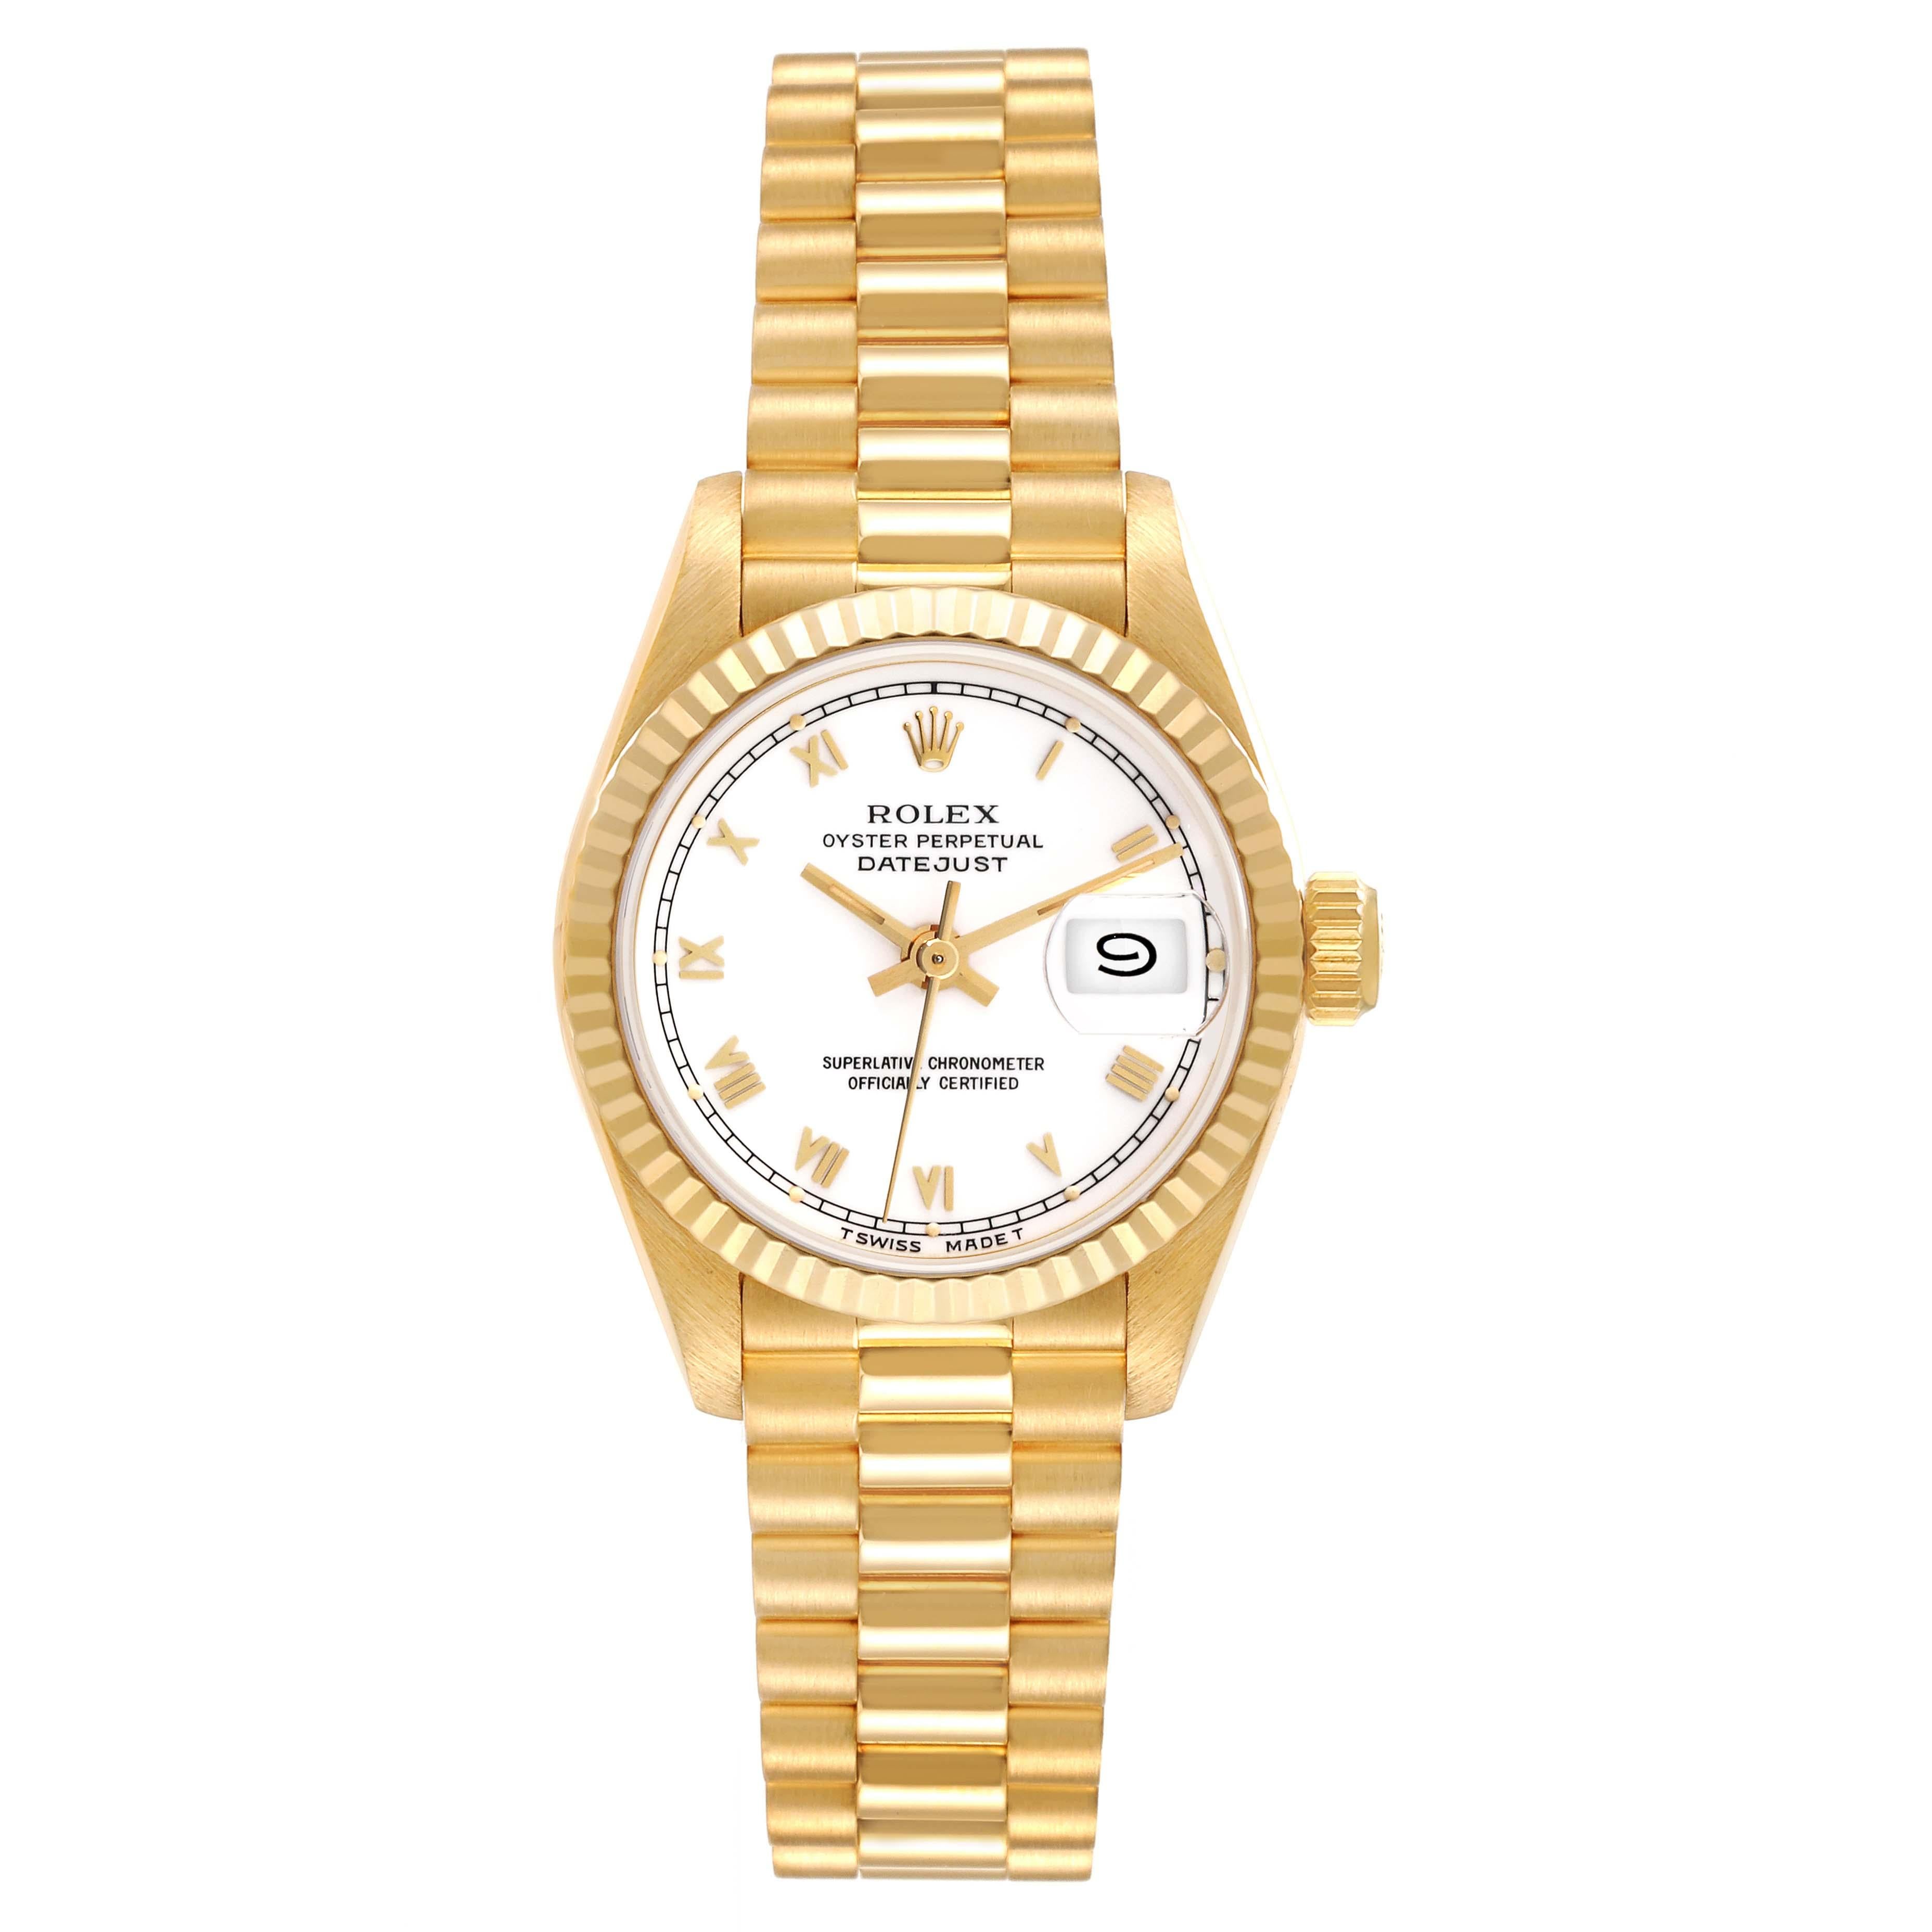 Rolex Datejust President Yellow Gold White Roman Dial Ladies Watch 69178. Officially certified chronometer automatic self-winding movement. 18k yellow gold oyster case 26.0 mm in diameter. Rolex logo on the crown. 18k yellow gold fluted bezel.